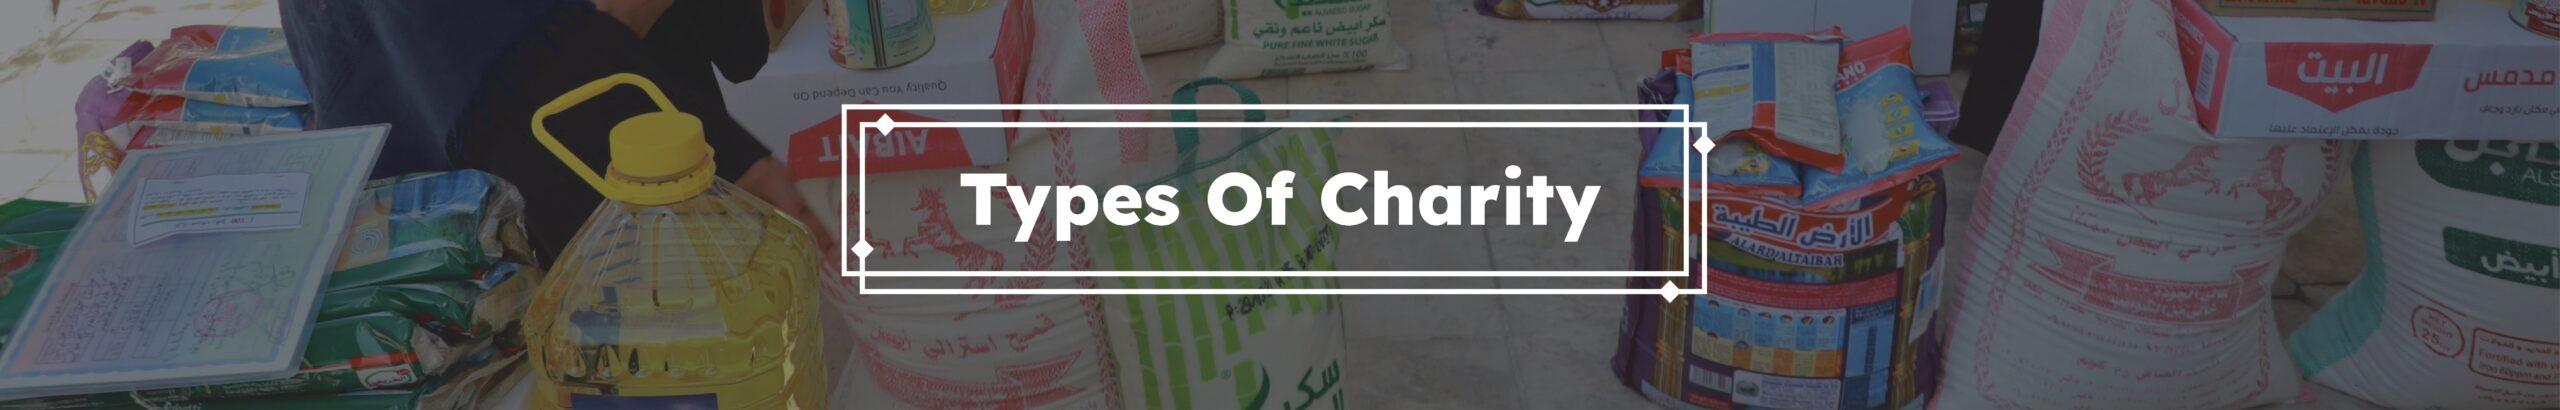 type of charity